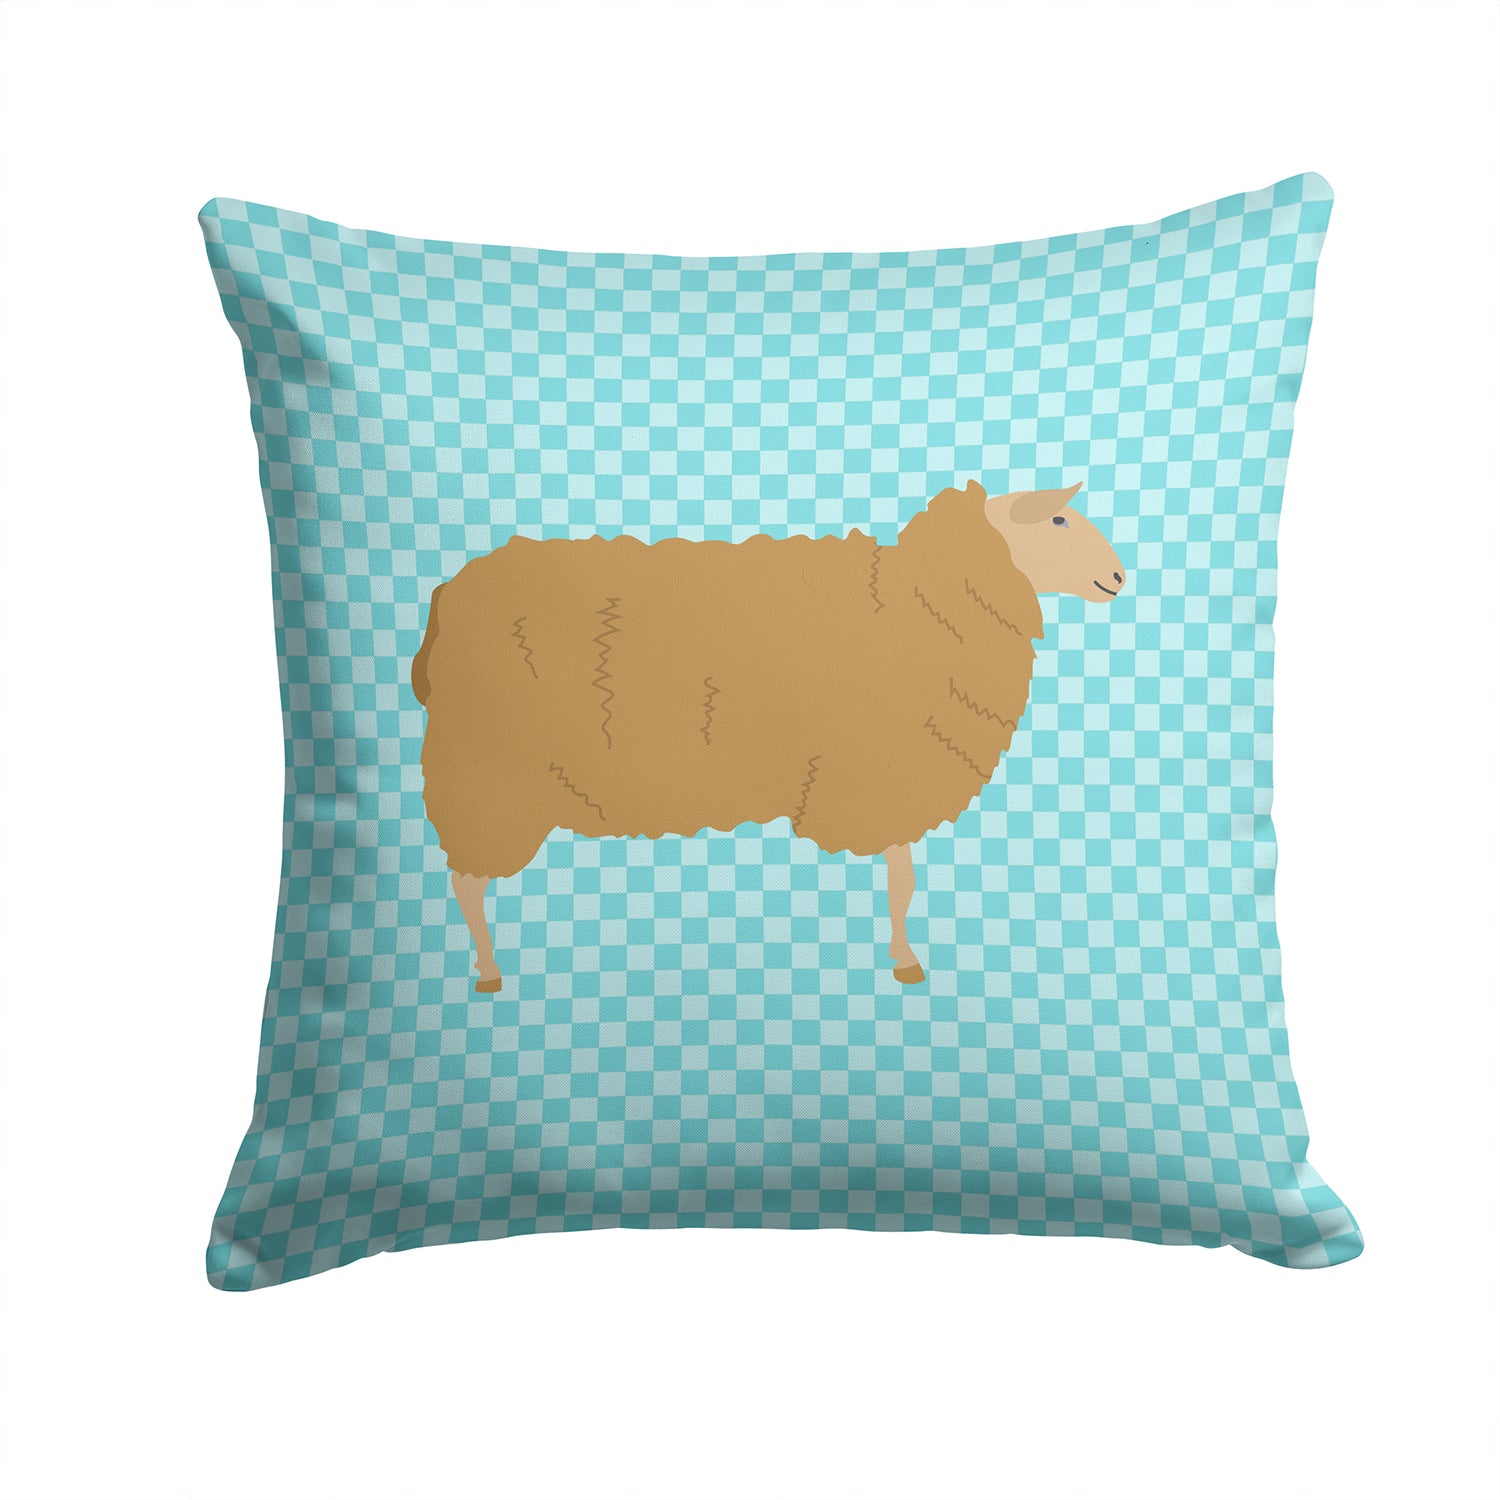 East Friesian Sheep Blue Check Fabric Decorative Pillow BB8151PW1414 - the-store.com